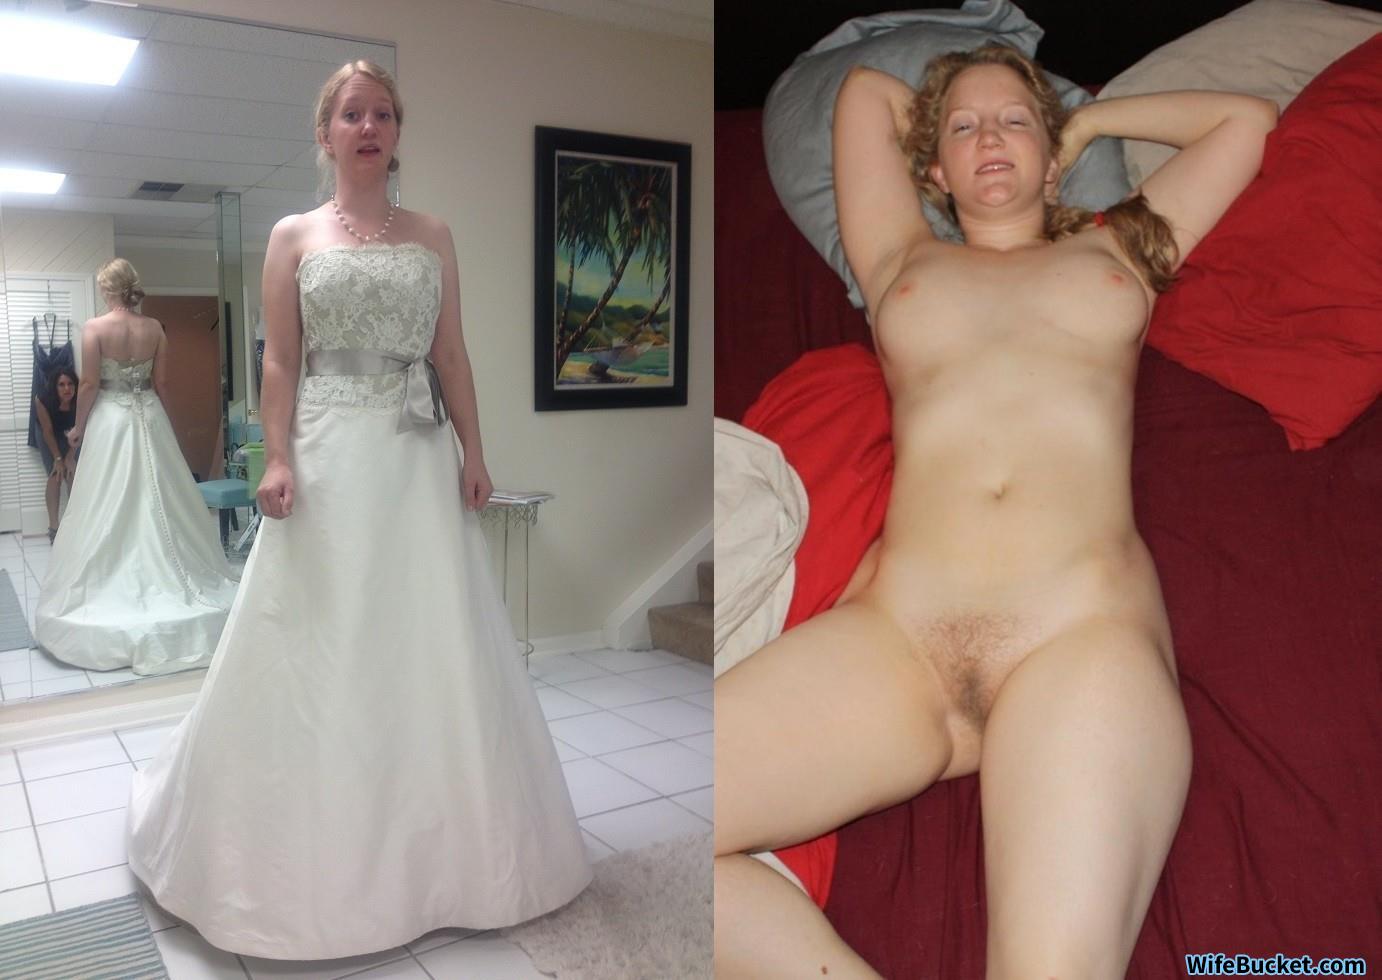 Bbw Dressed And Naked - Before-after sex pics â€“ WifeBucket | Offical MILF Blog